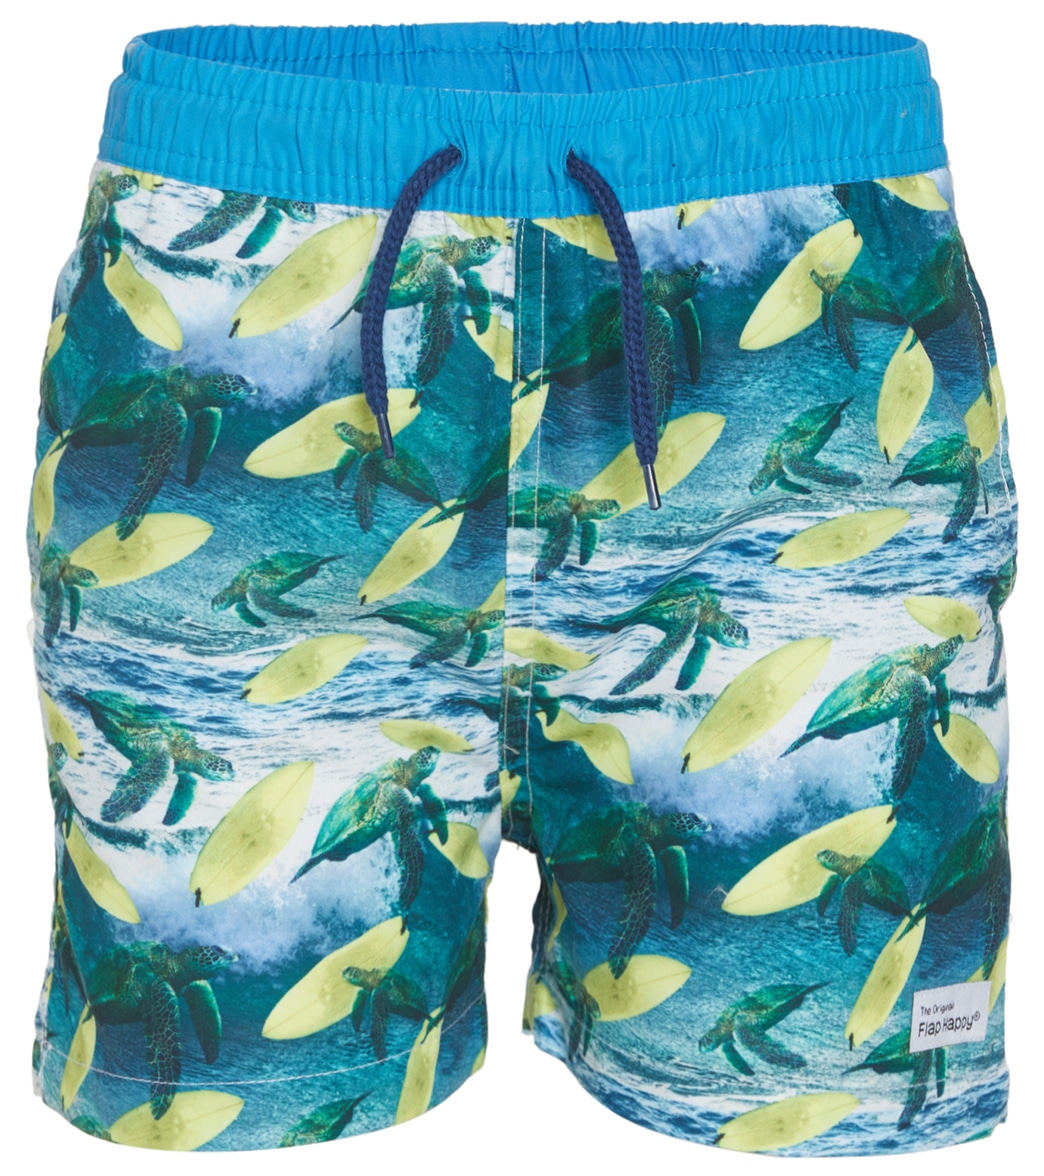 Flap Happy Boys' Surfing Sea Turtles Wesley Upf 50+ Swim Trunks Baby Toddler - 12 Months - Swimoutlet.com